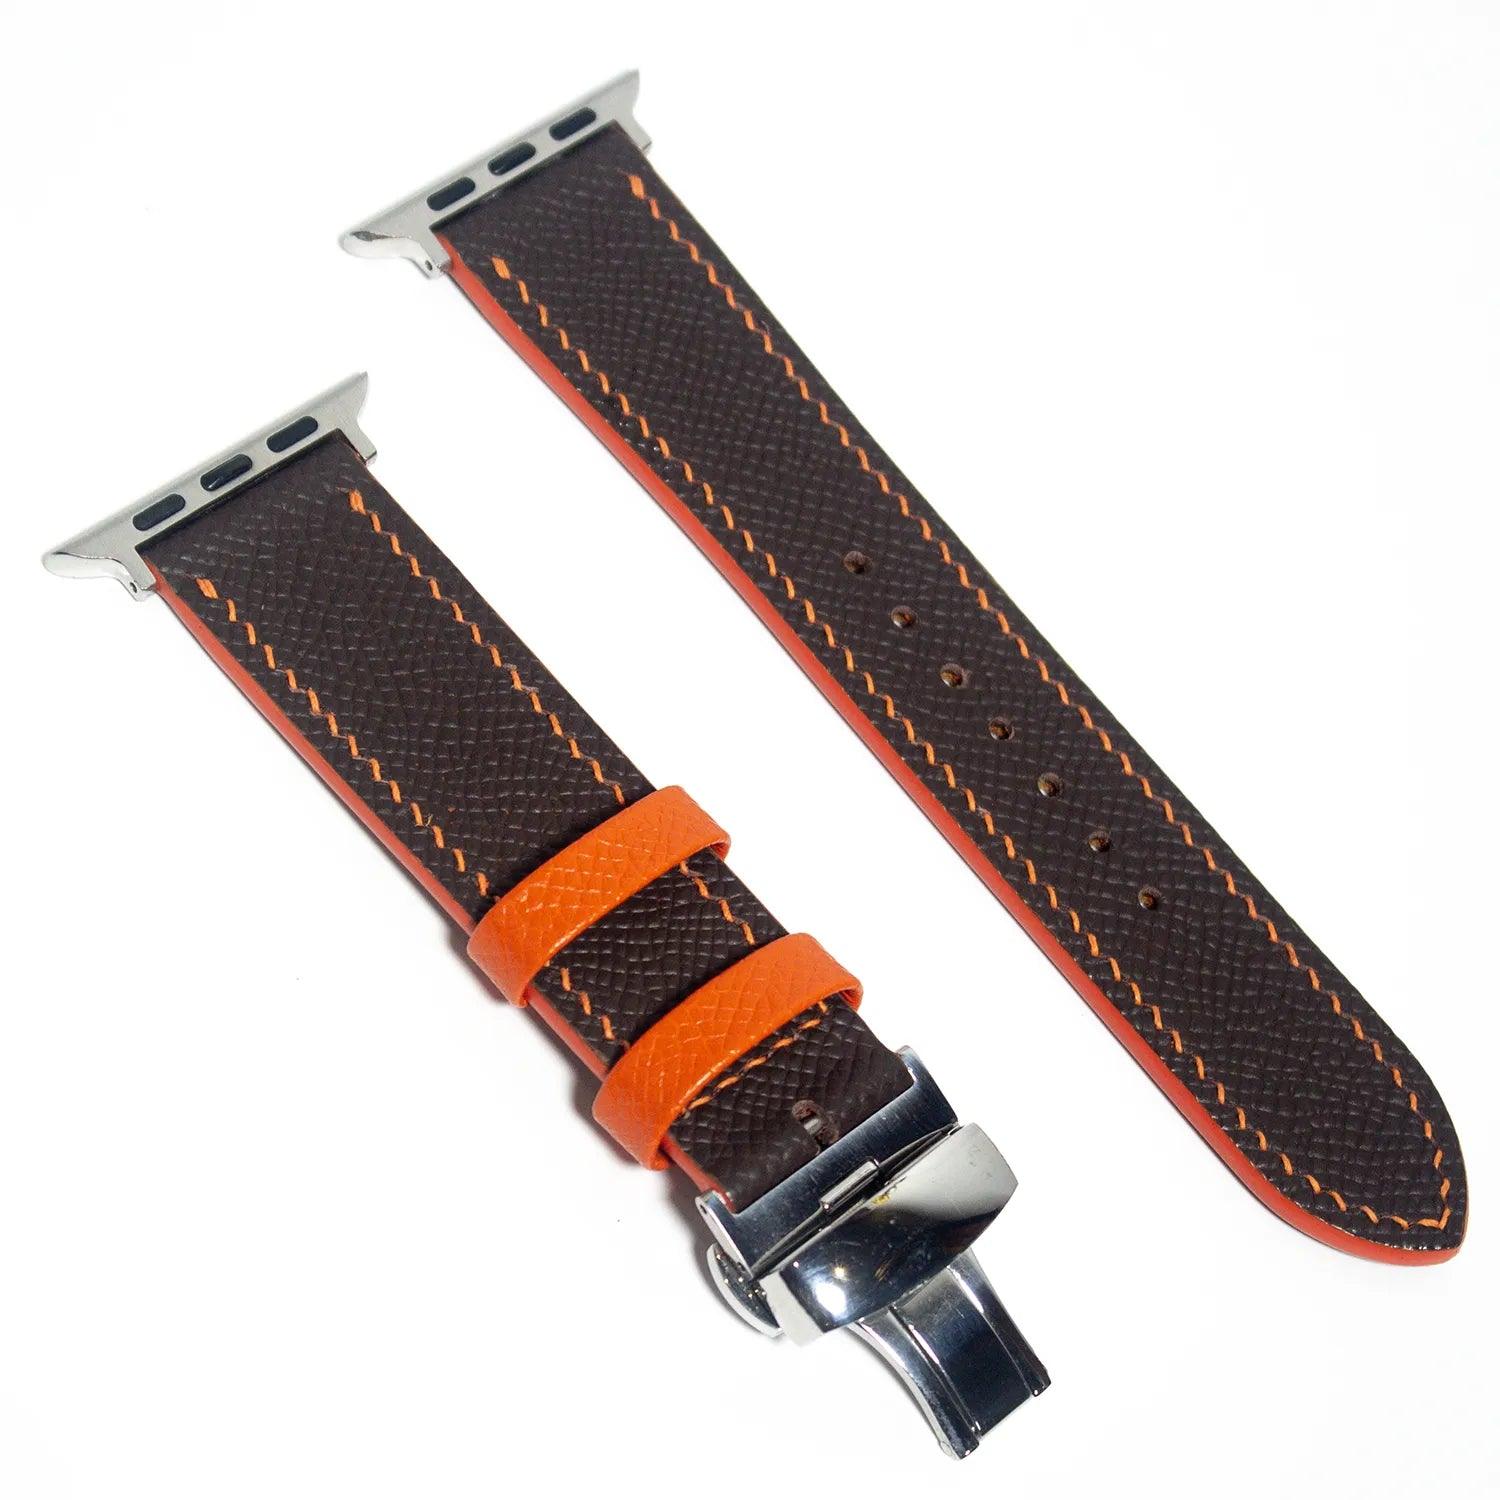 Elegant leather Apple Watch band in brown Epsom leather, enhanced with orange stitching, merging durability with style.